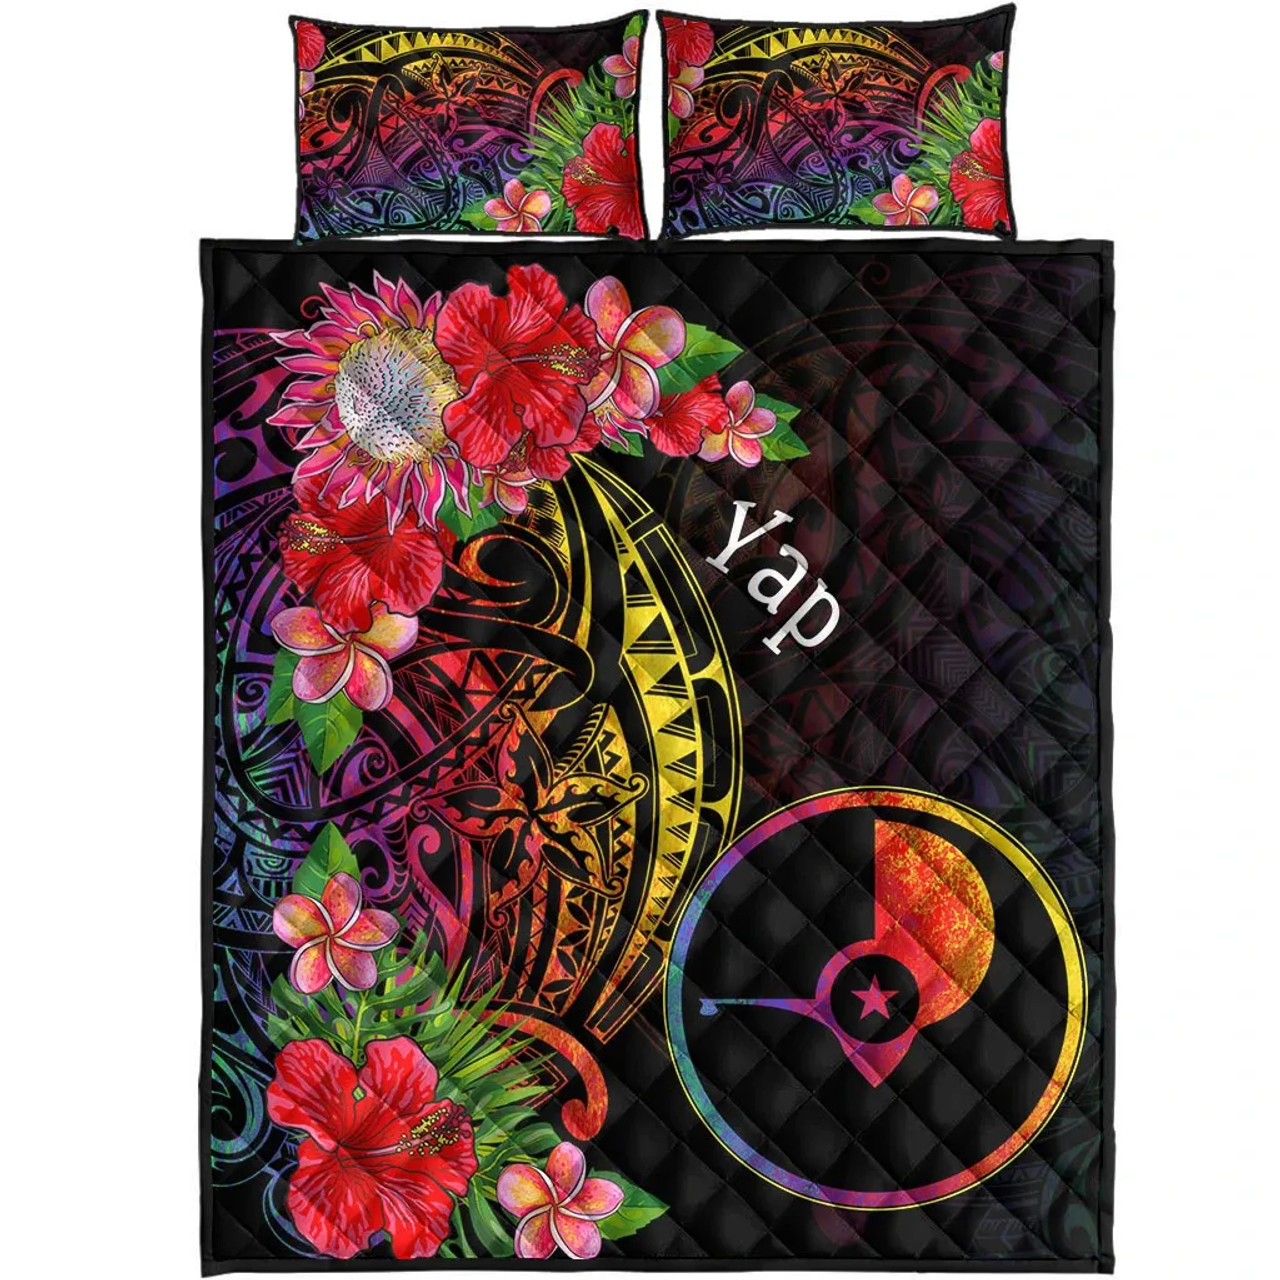 Yap State Quilt Bed Set - Tropical Hippie Style 2